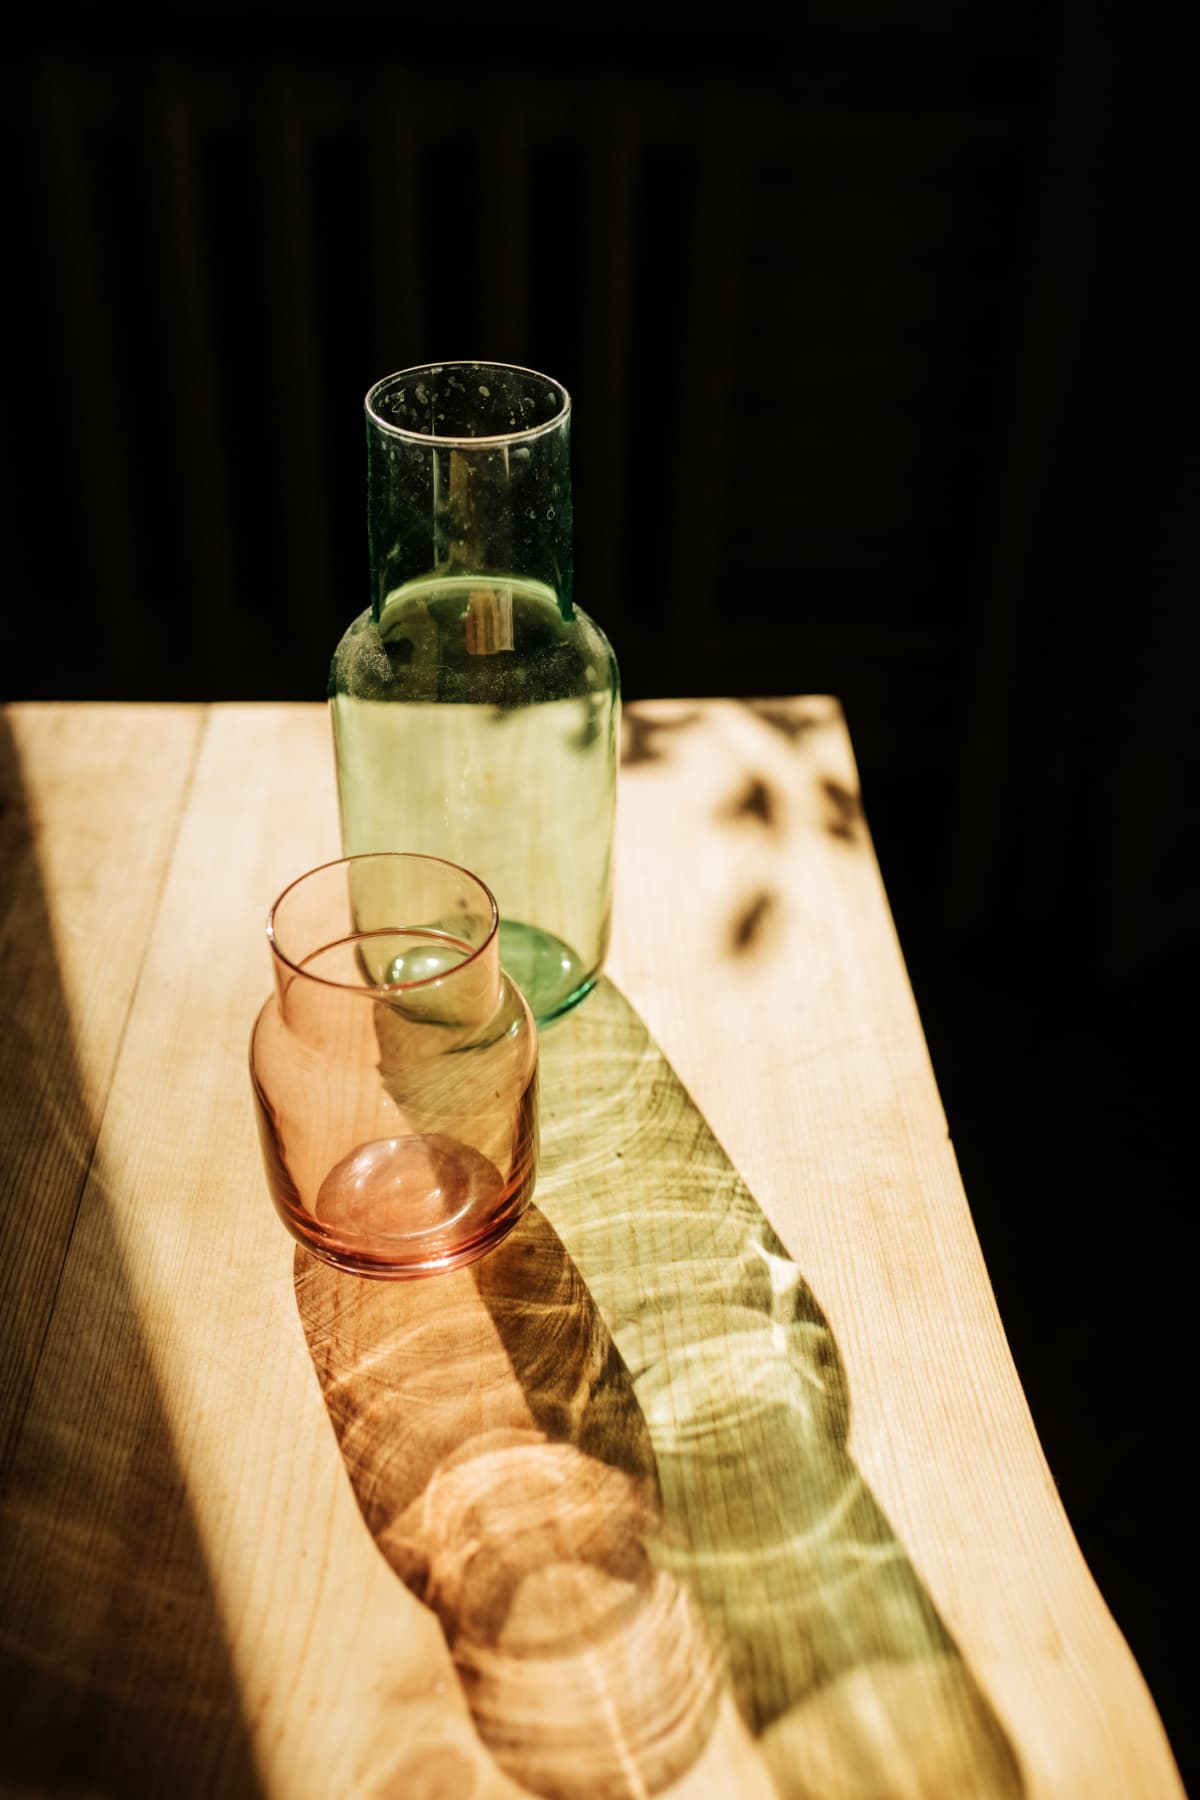 Old glass vases in the sun